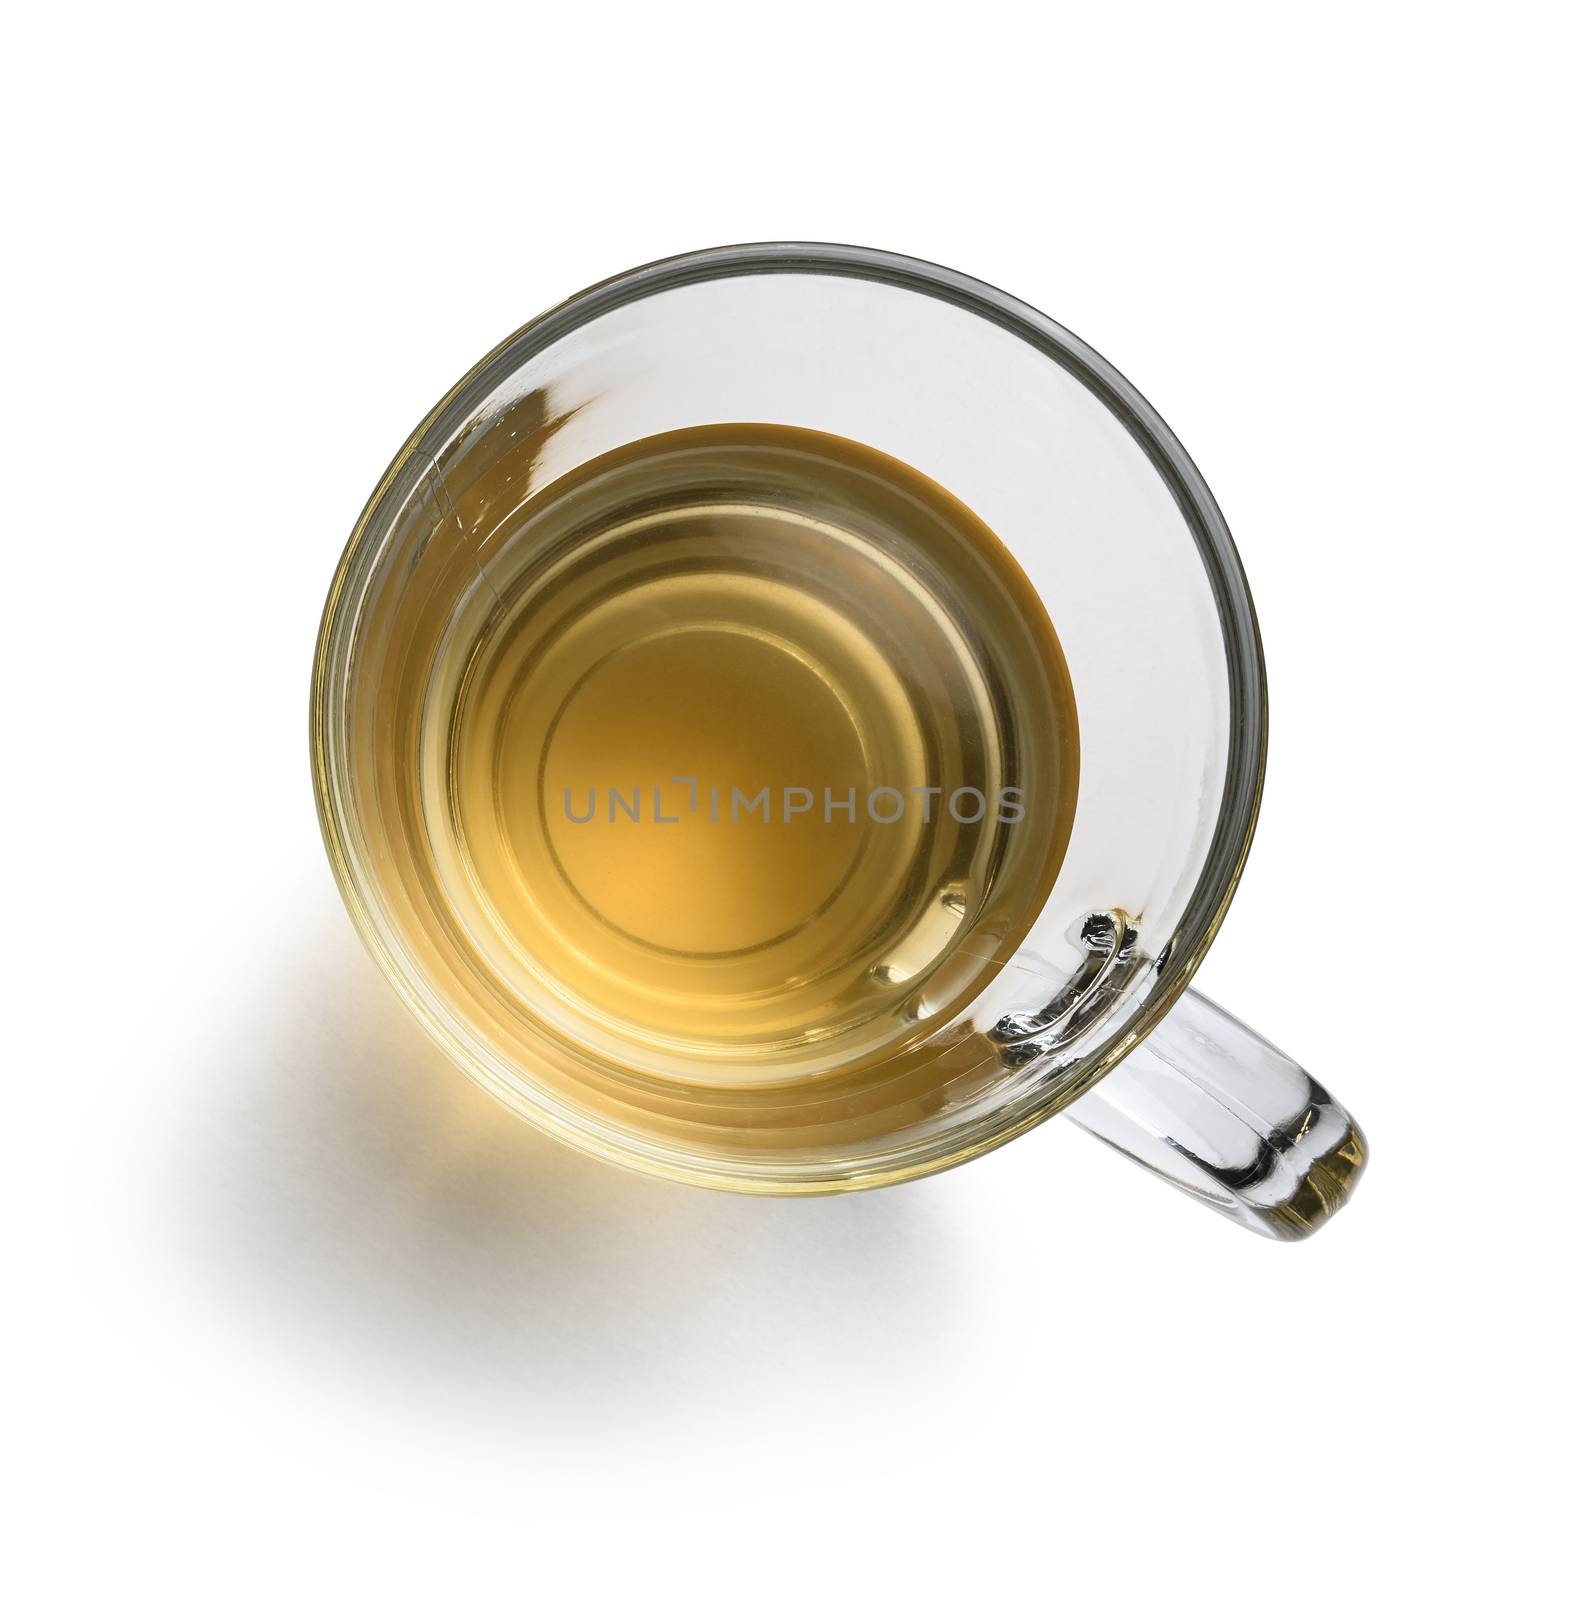 Tea in a glass mug on a white background. The view from the top.